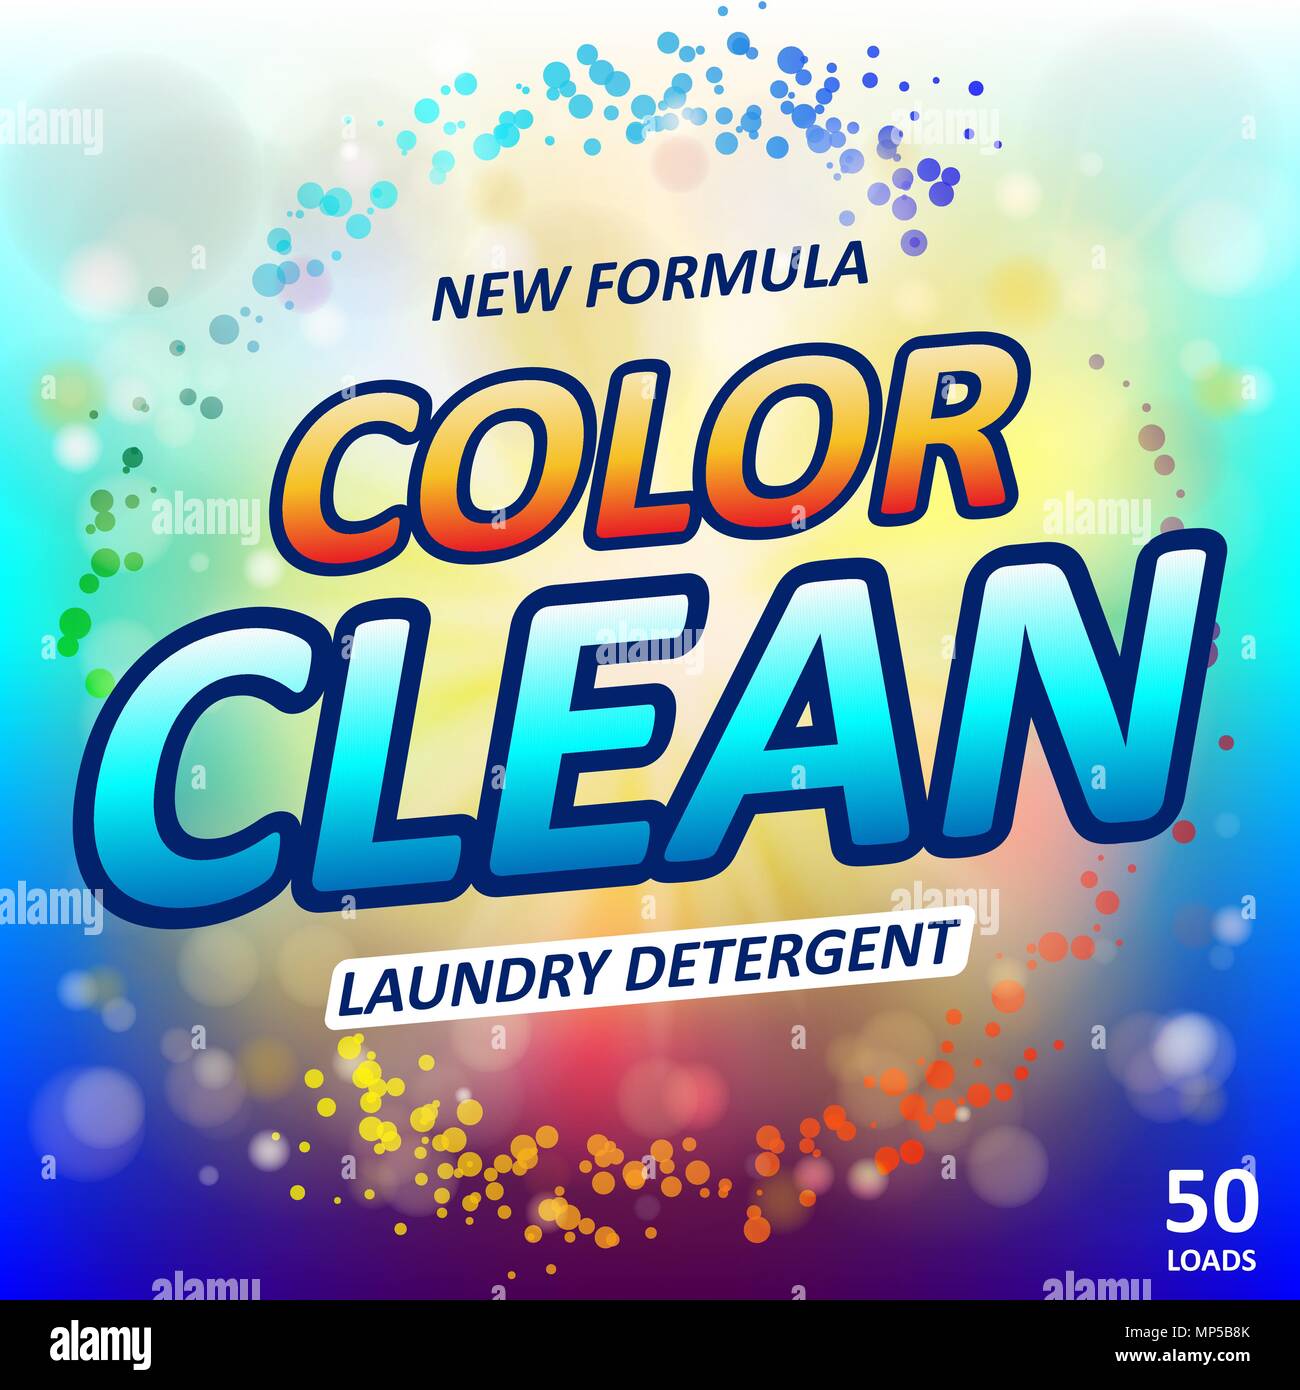 Laundry detergent package ads. Toilet or bathroom tub cleanser design. Washing machine laundry detergent packaging template. Vector illustration Stock Vector